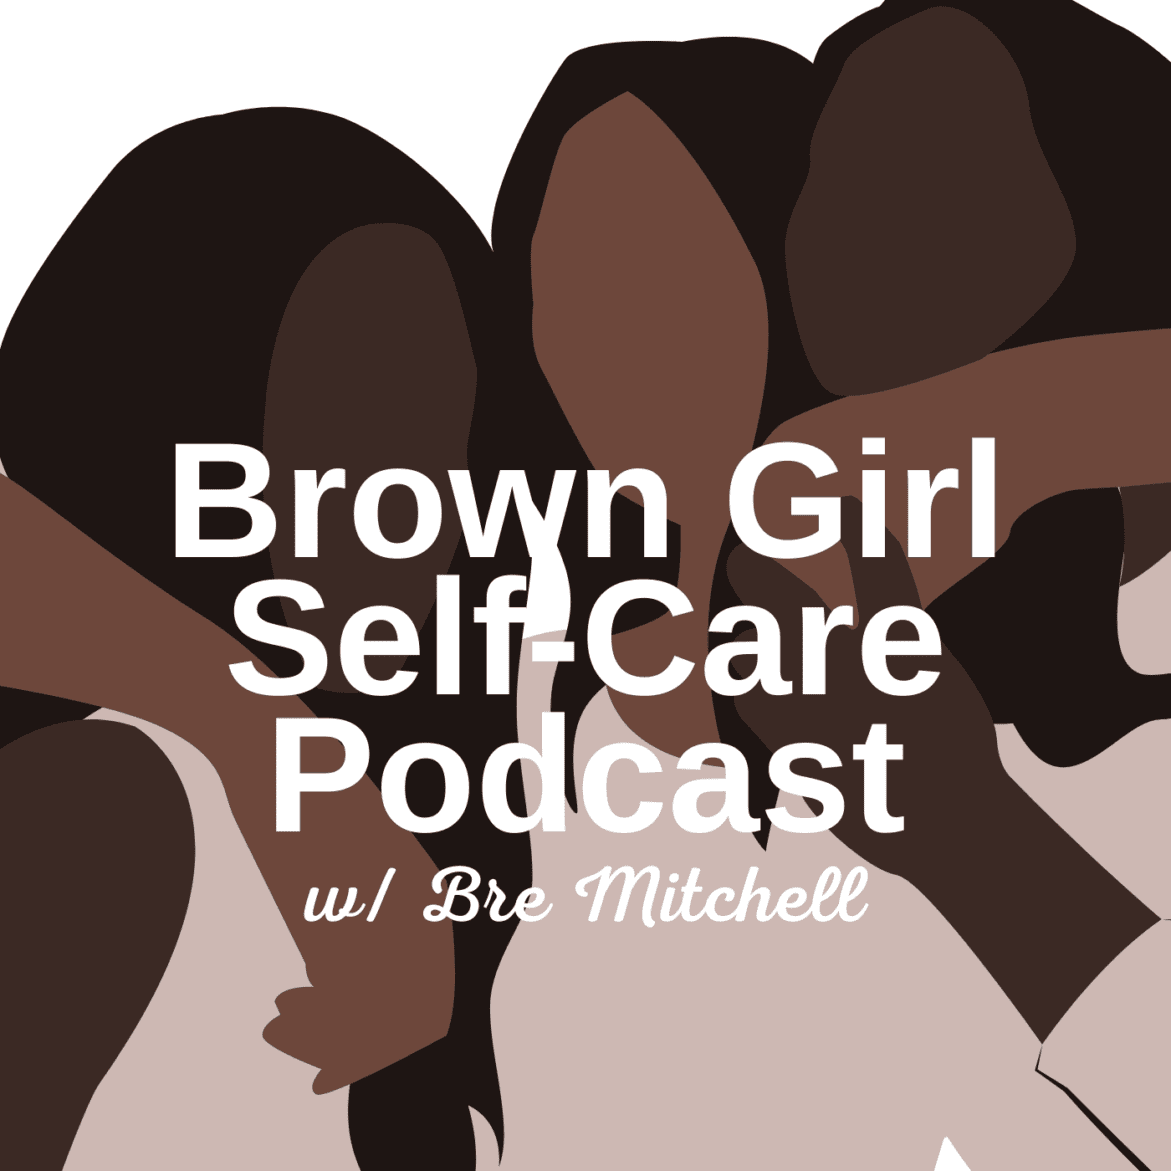 Black Podcasting - Dr. Nic Hardy On Caregiver Stress, How Overcompensating Breaks Down Relationships and Why "We Need To Talk" Text Messages Aren't Self-Care